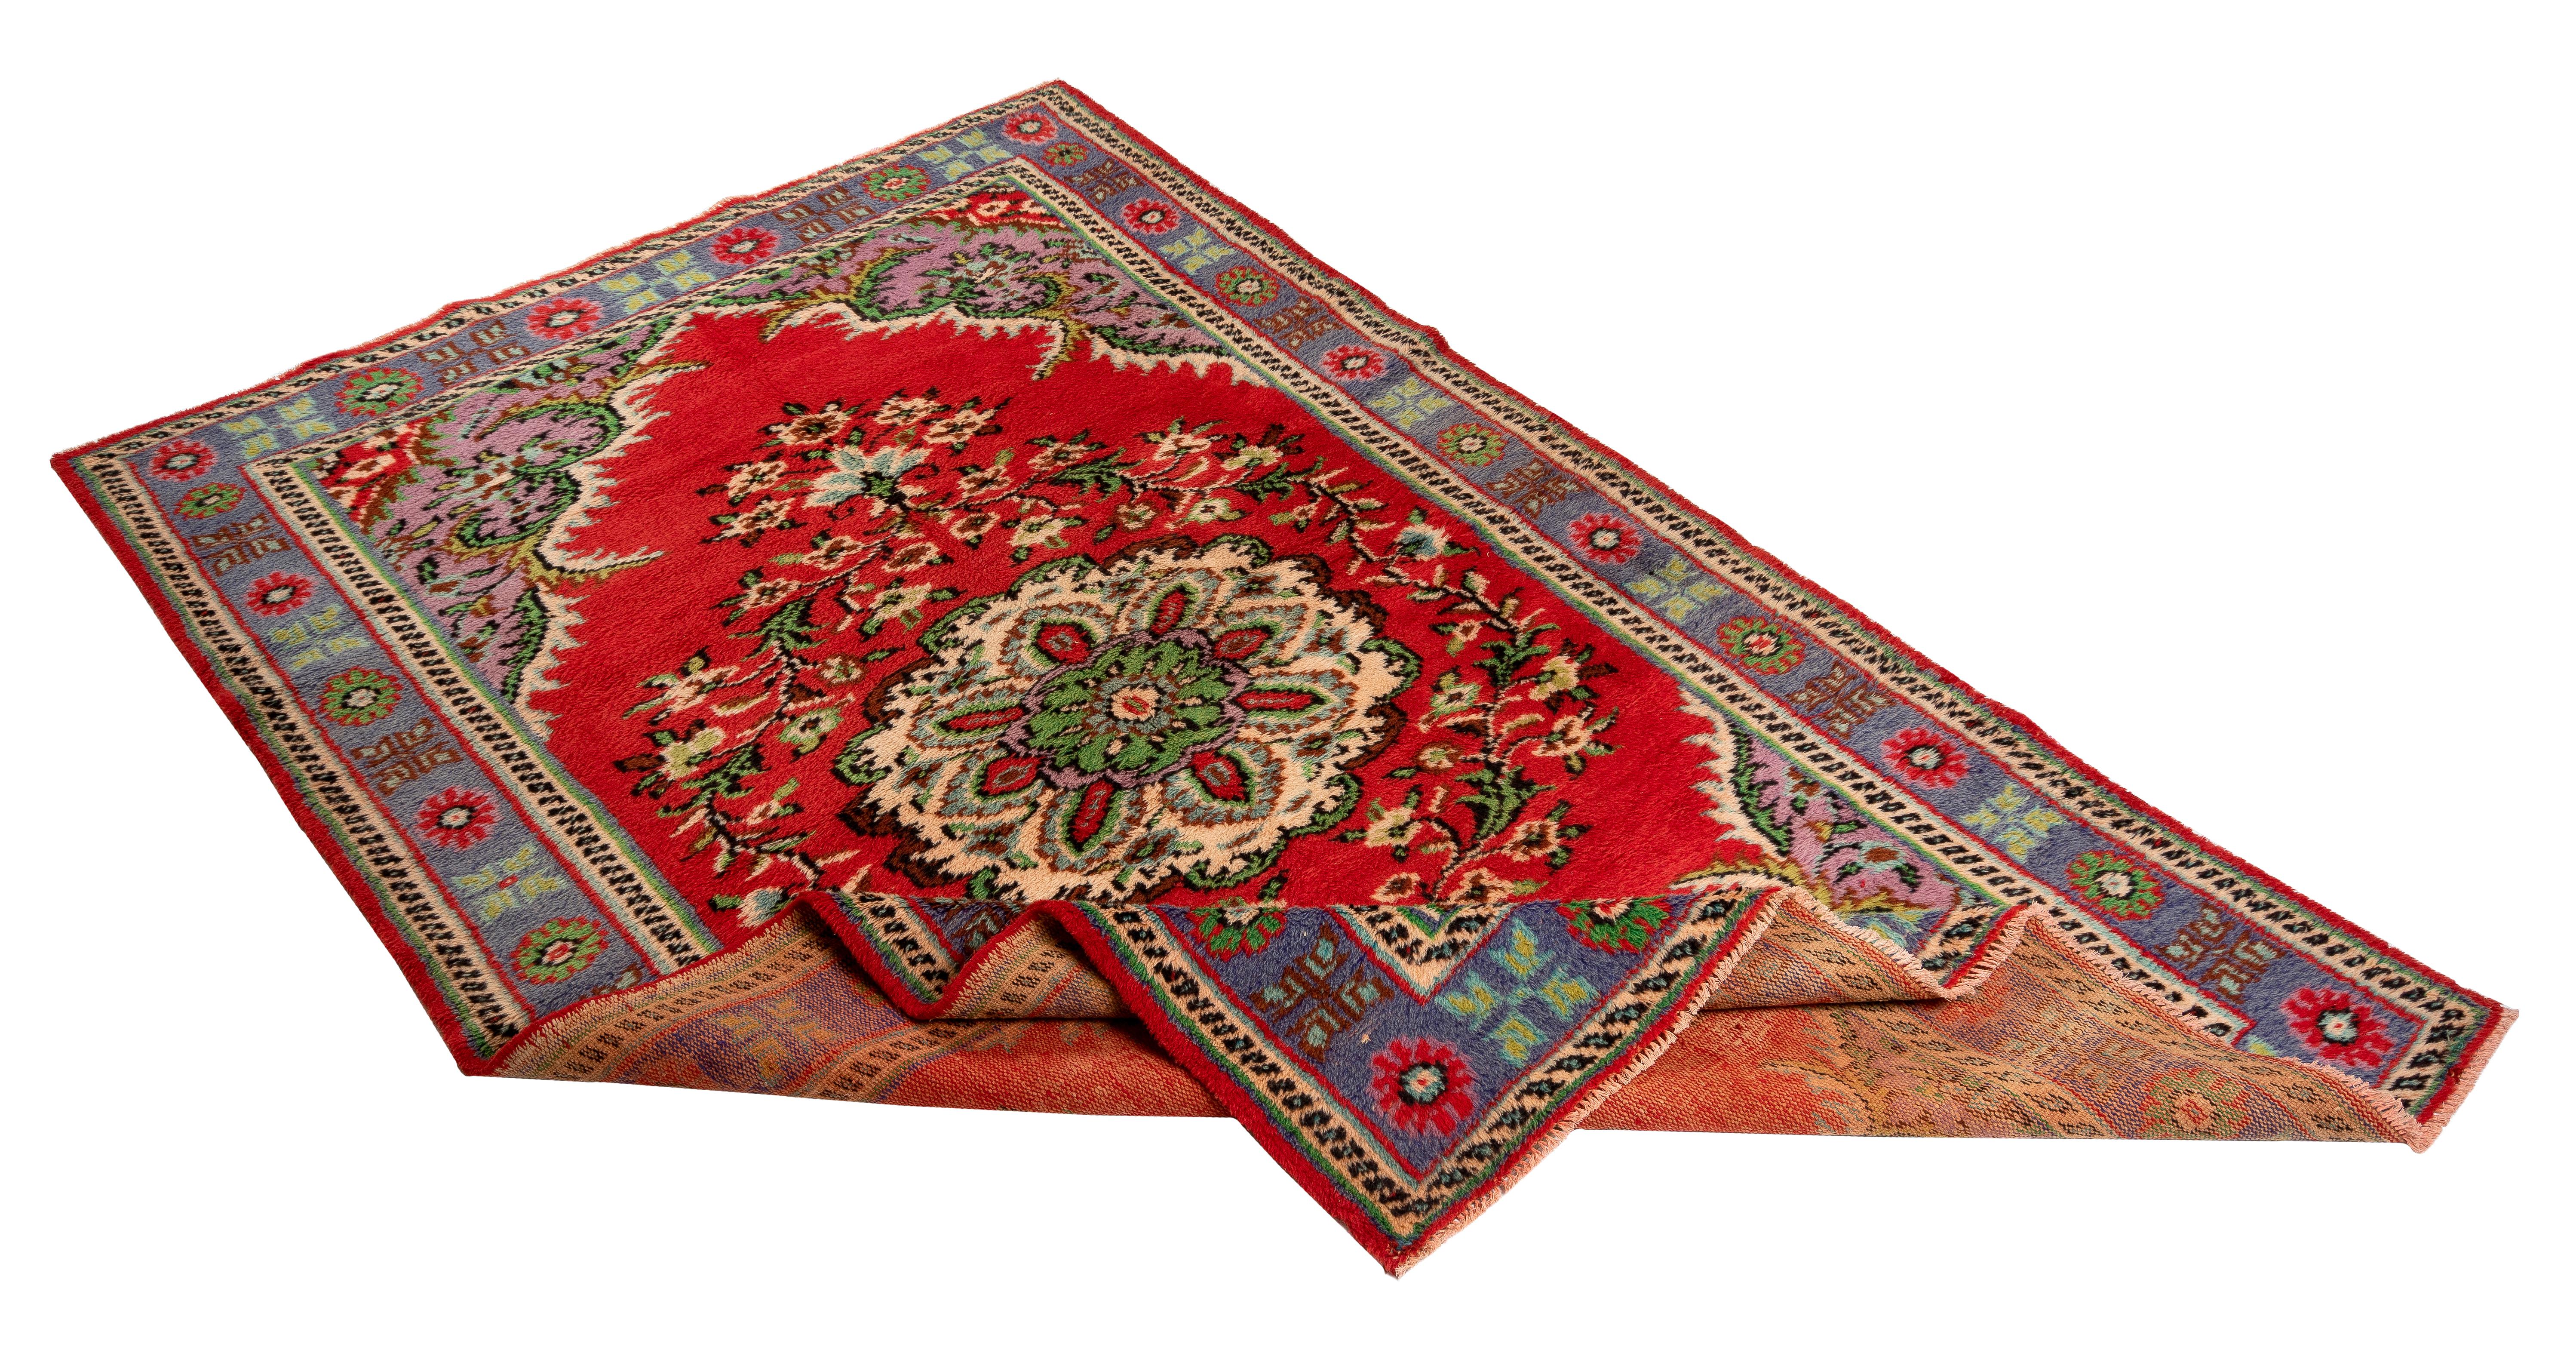 A finely hand-knotted vintage Turkish carpet from 1960s featuring a floral medallion design ivory, mint green and celadon green against a vivid red field. Corner pieces in lavender finished with scrolling leaves in bright emerald green and the main